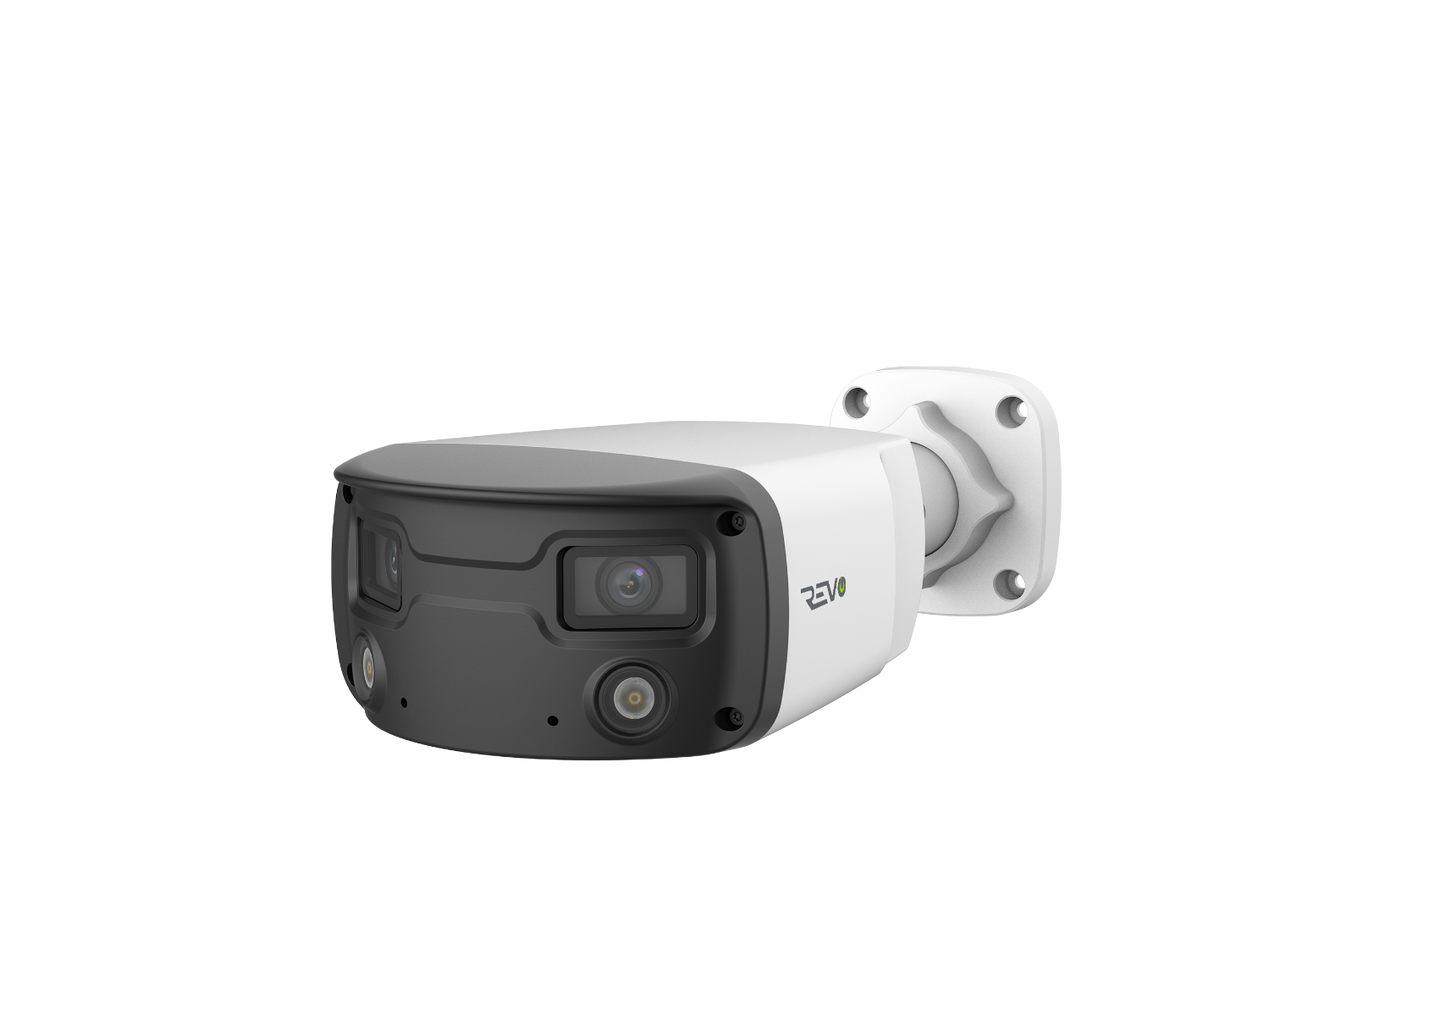 REVO ULTRA 2K (4MP) Outdoor Security Camera with 160 Degree Wide Angle Lens and Two-way Audio